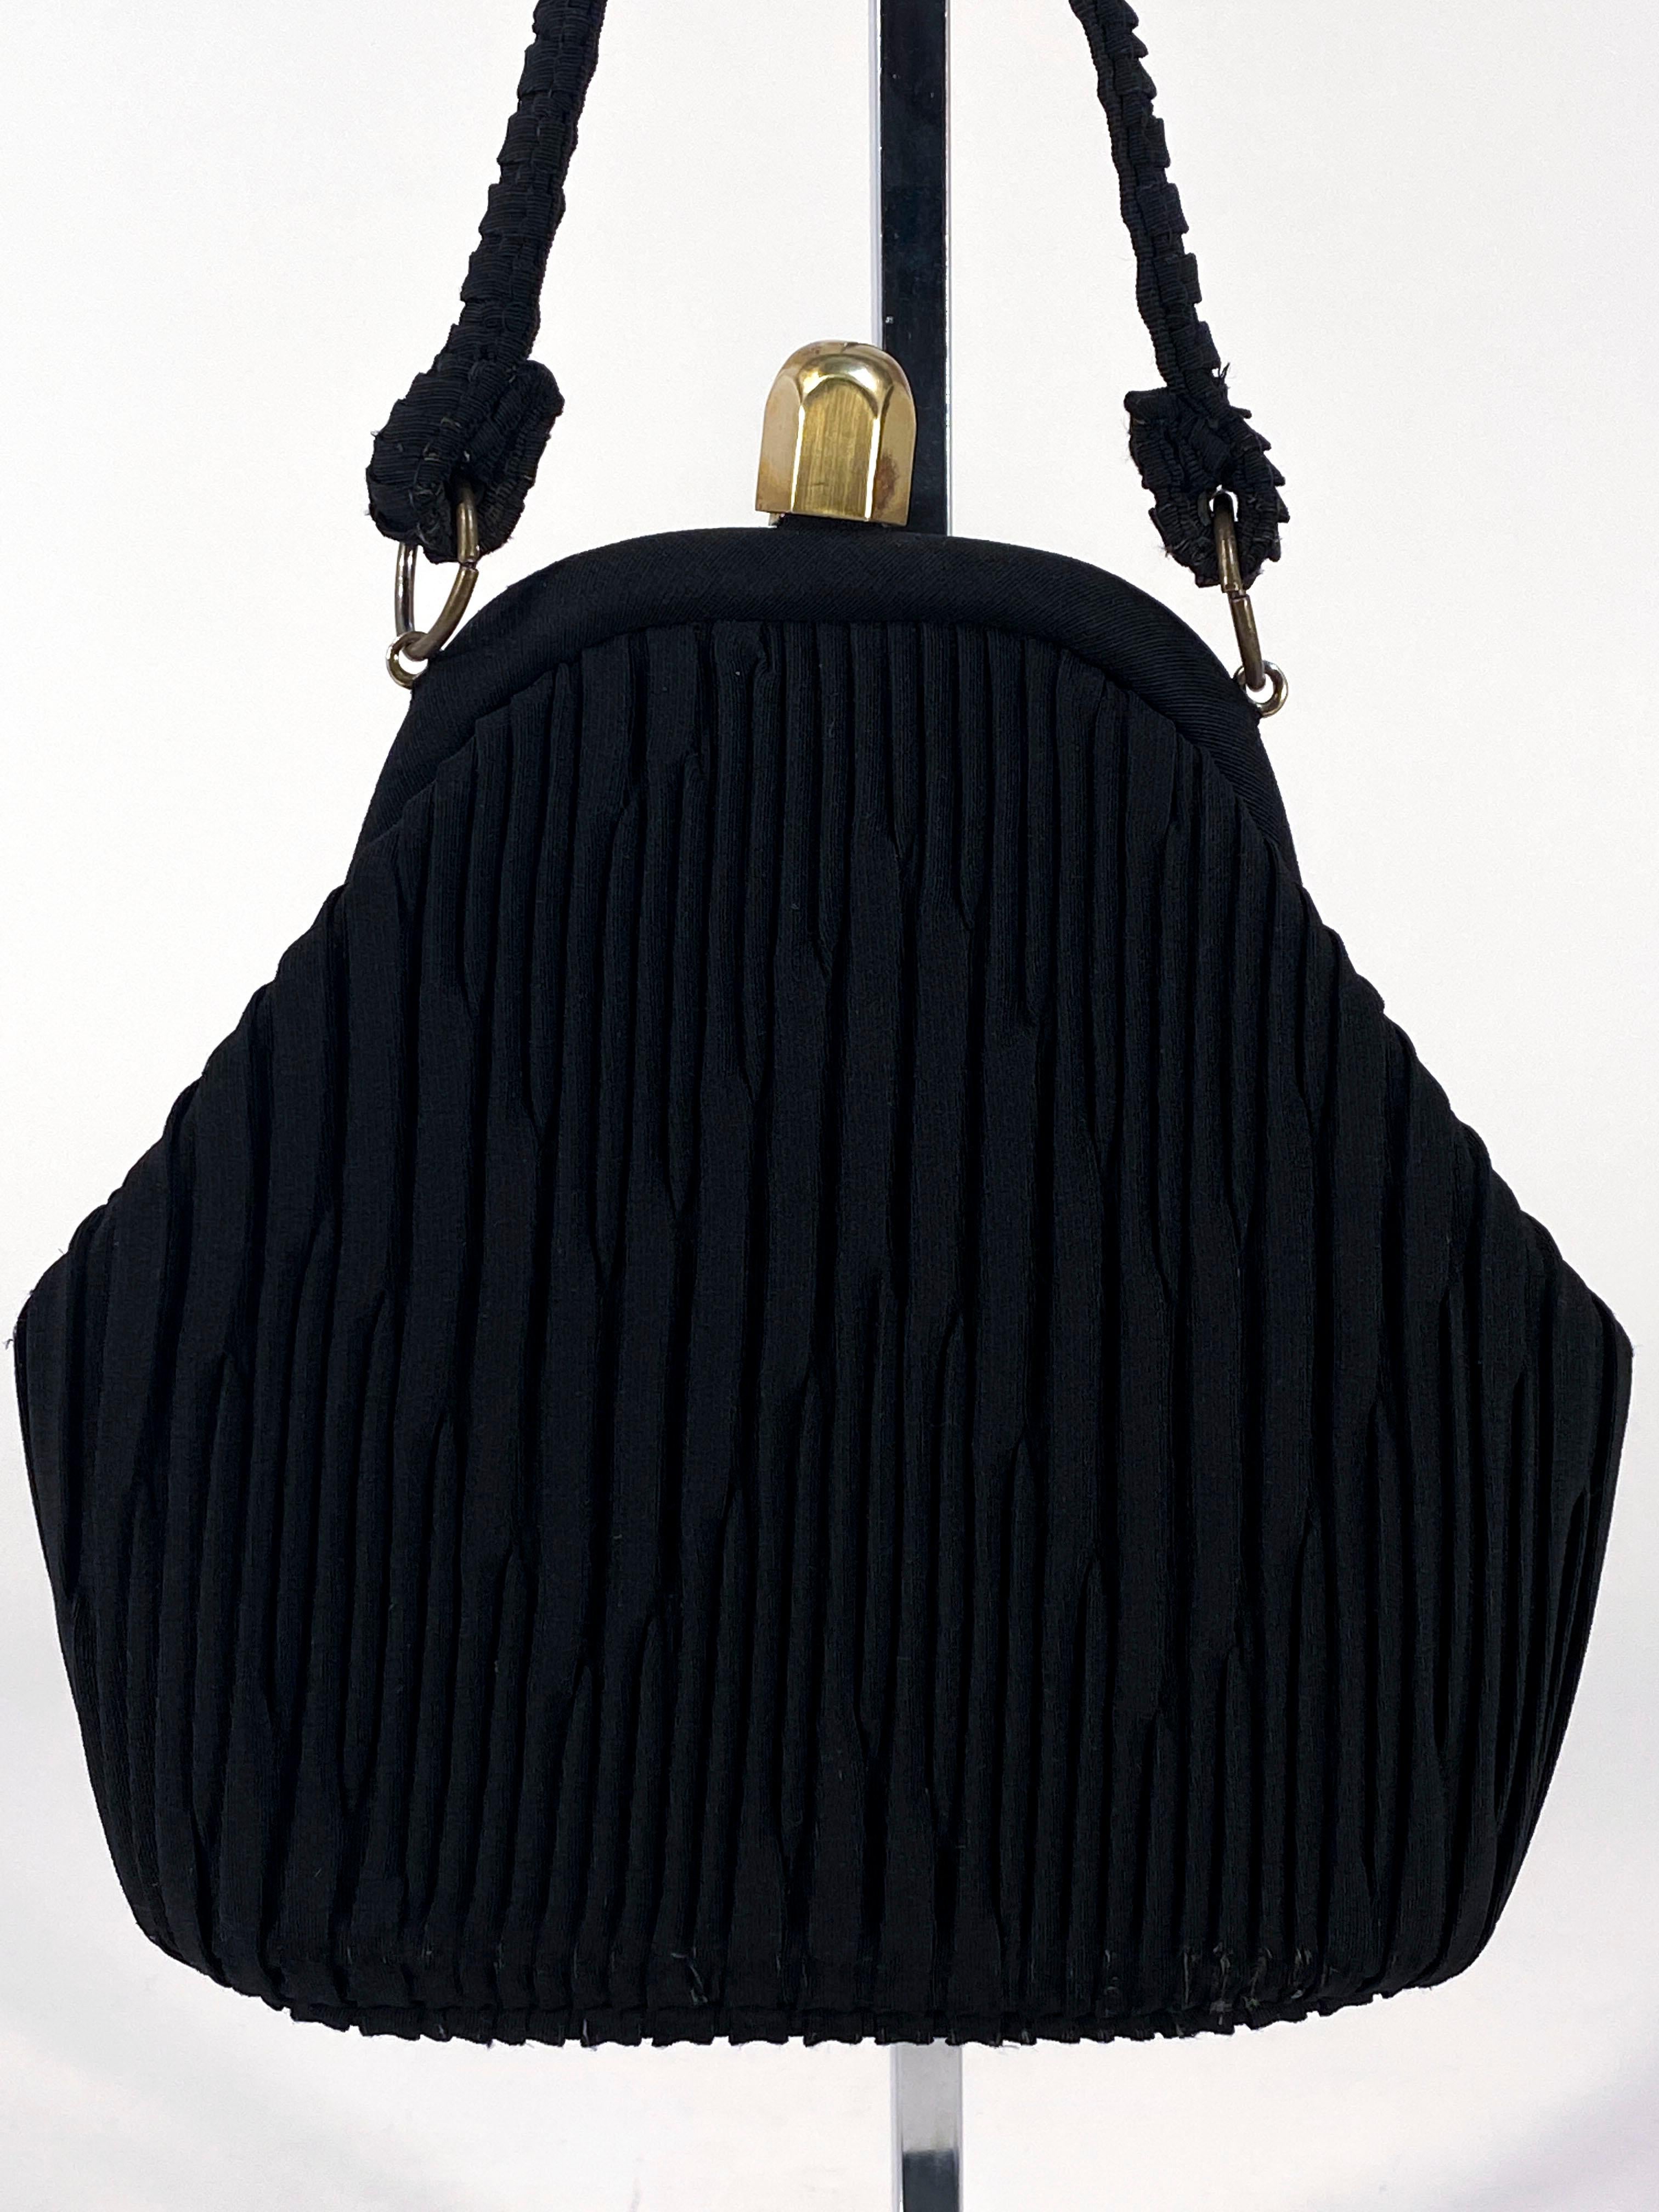 1930s Black Art Deco hand back with intricate decorative knife pleating in a zig-zag pattern on both sides of the bag. The handle has matching pleats and the inside frame/closure is made of brass. The interior is lined in a soft pink with a built in